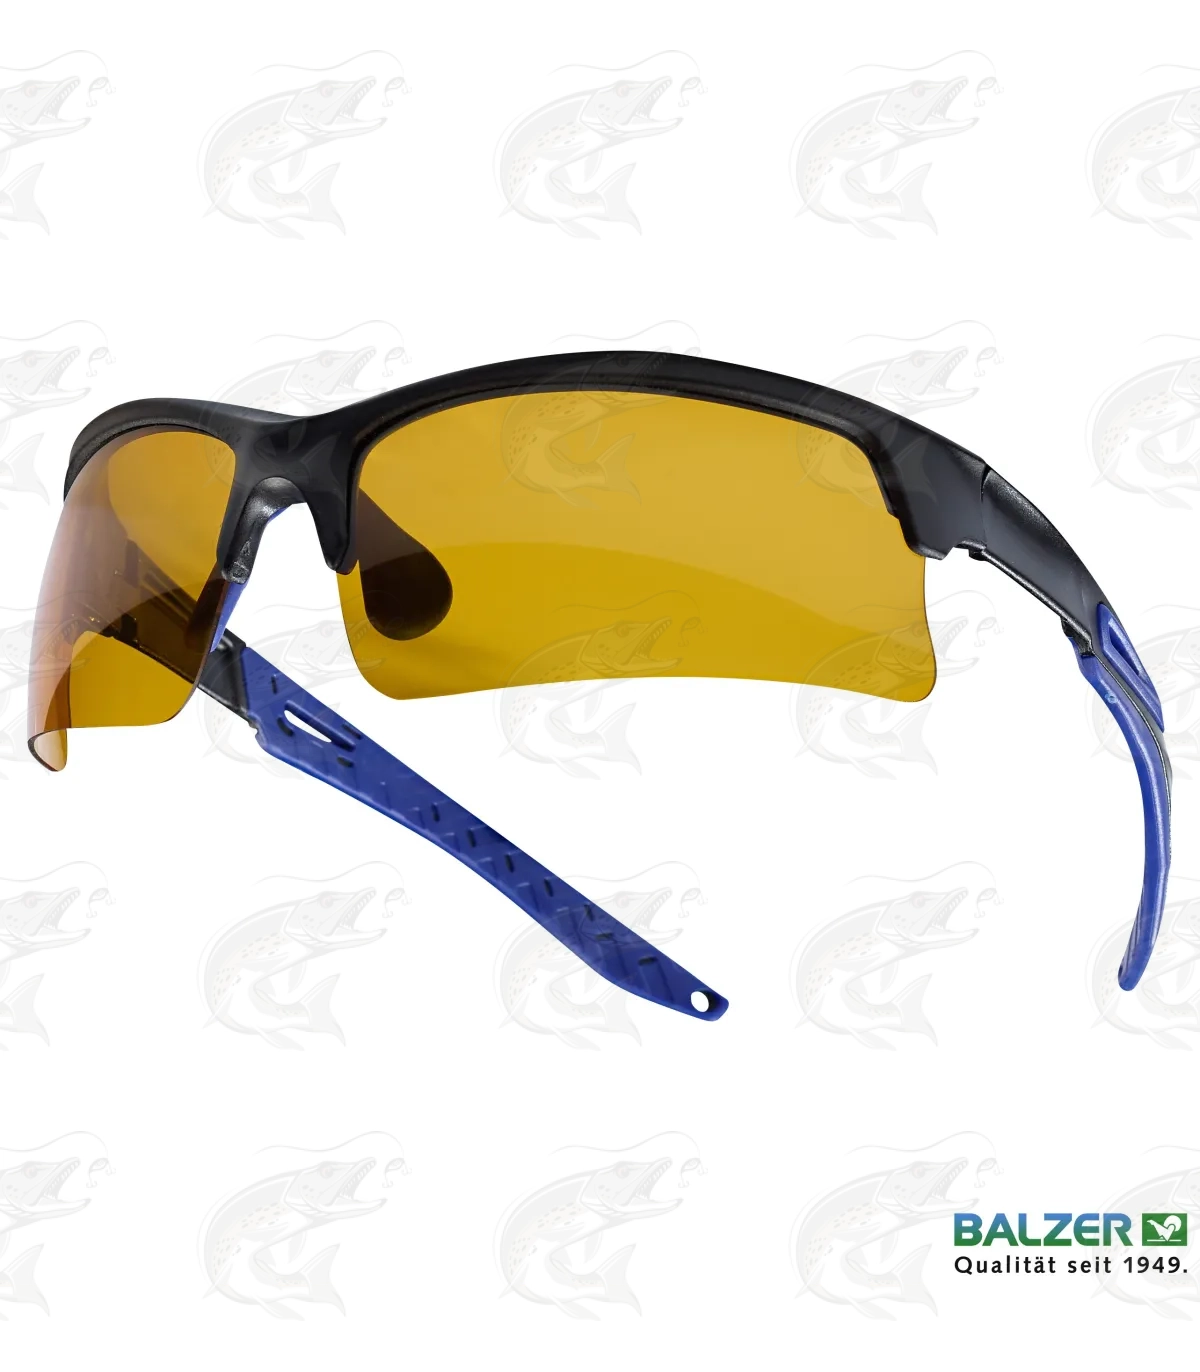 Boating etc Polarized Nignt Driving Sunglasses Great for Driving Fishing 